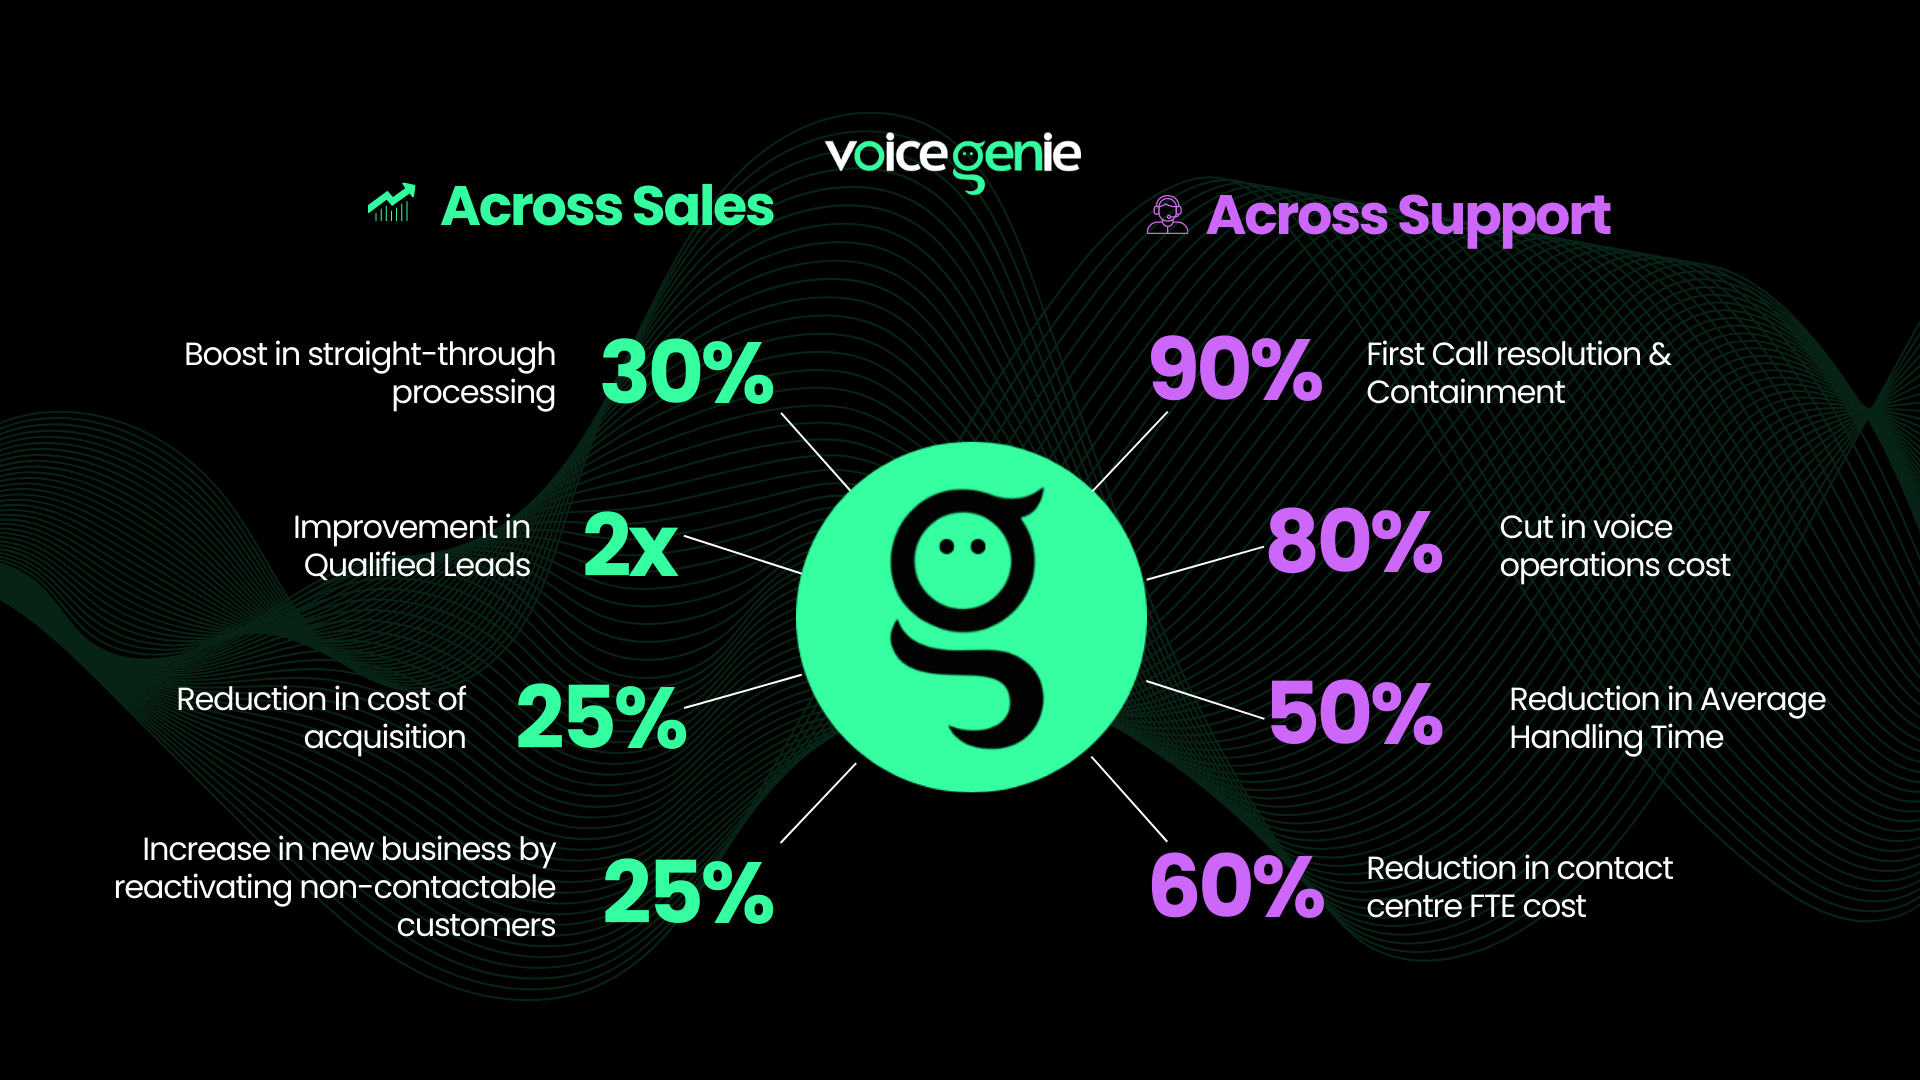 VoiceGenie - Results Across Sales & Support